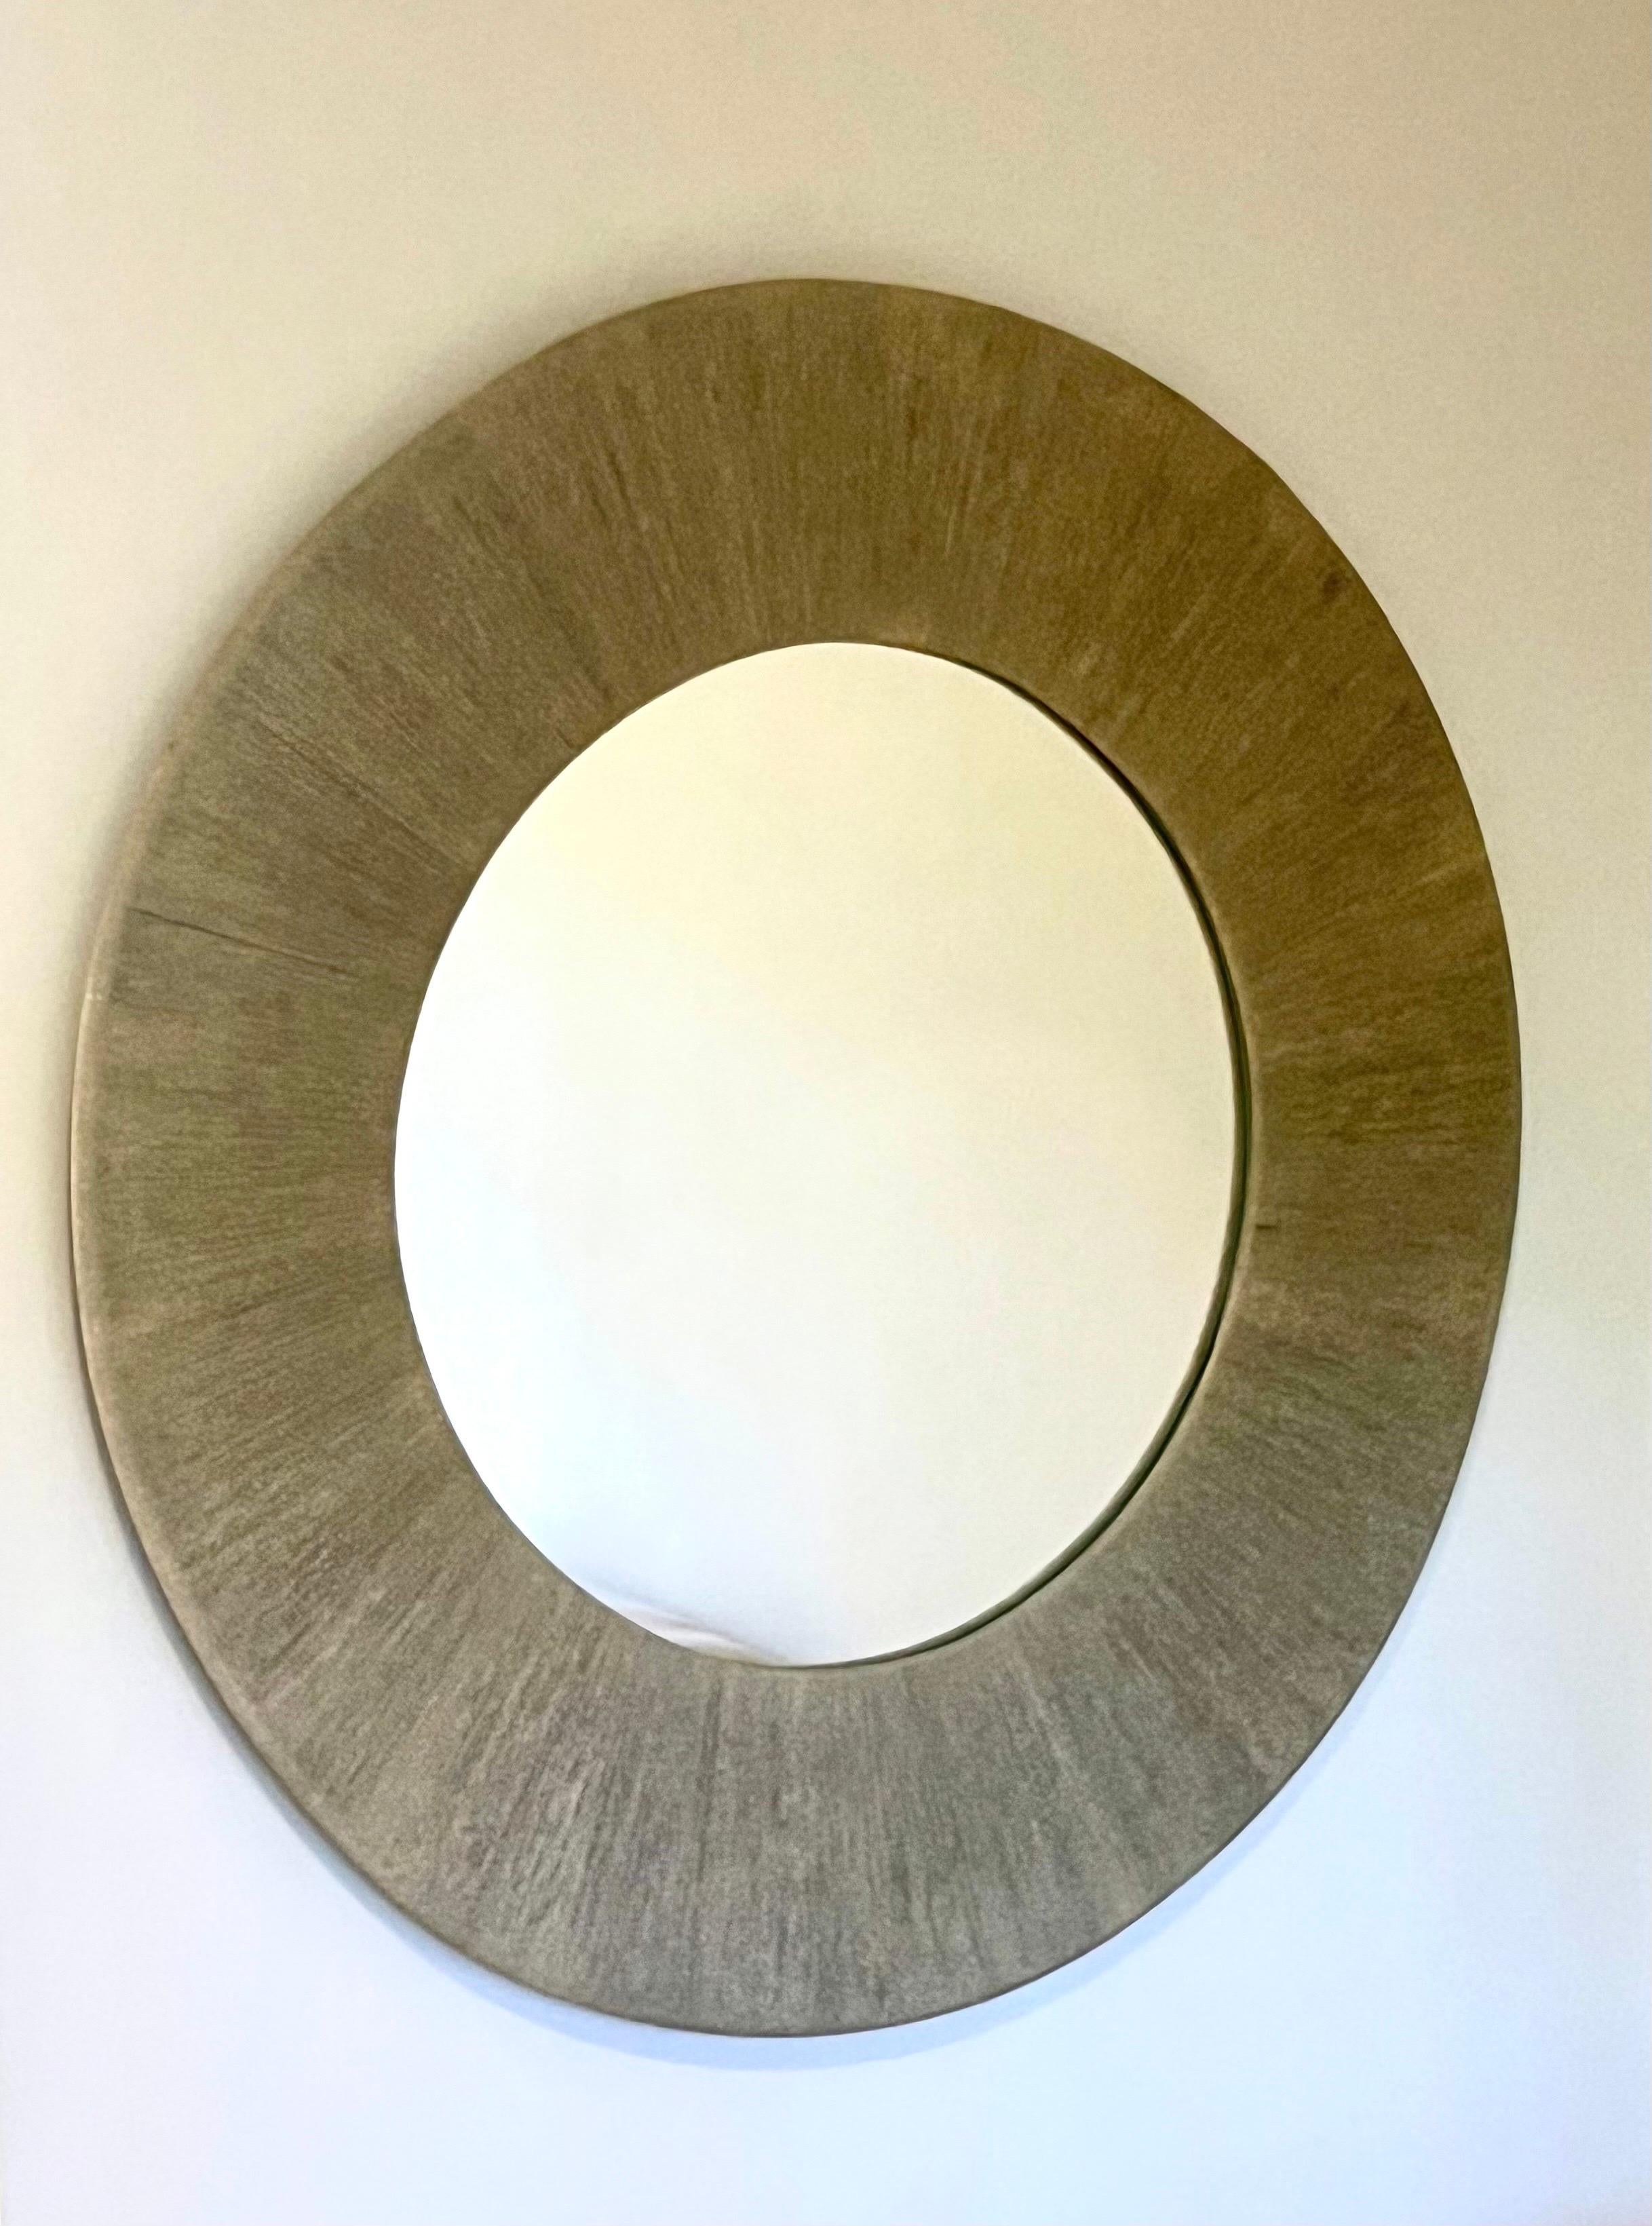 Elegant Large, Round French Modern Craftsman Mirror in the style of Adrien Audoux and Frida Minet. The mirror is composed of a round central mirror plate and is surrounded by rays of hand made braided and wrapped cord or rope emanating from the